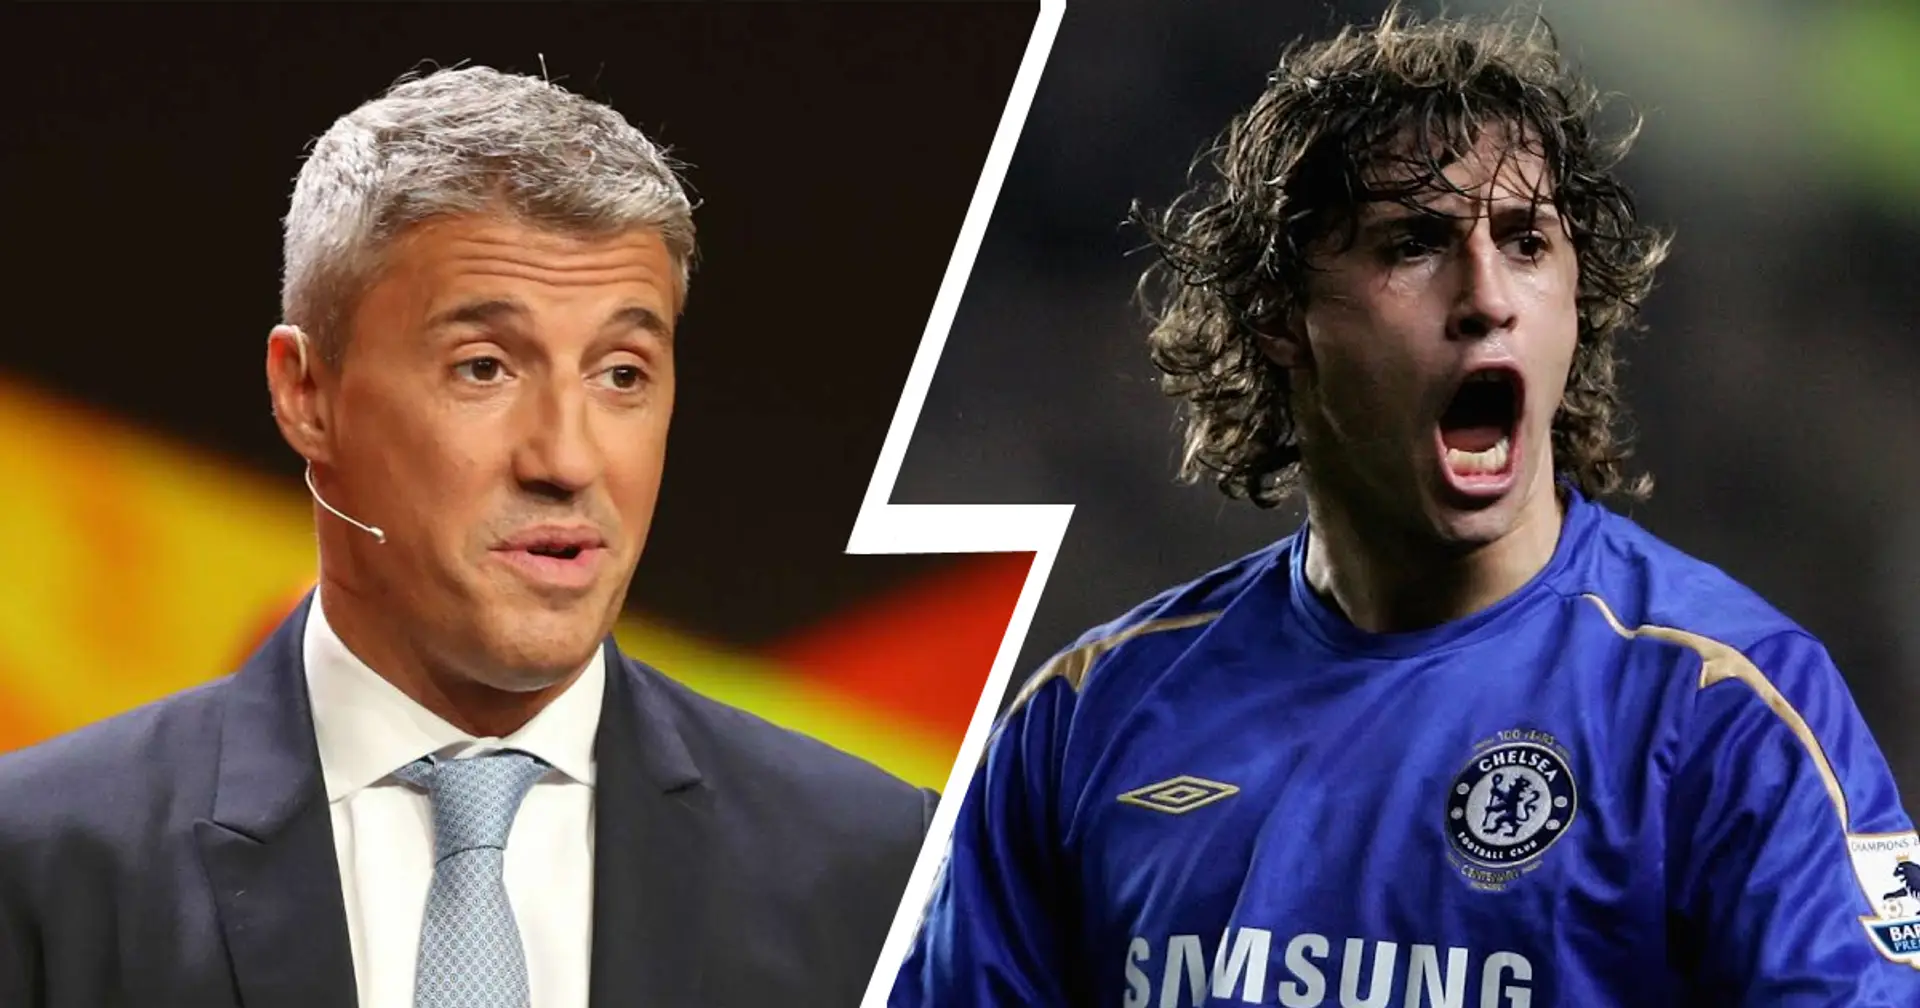 'They sold me to Chelsea without me knowing': Hernan Crespo tells bizarre story of his Stamford Bridge move